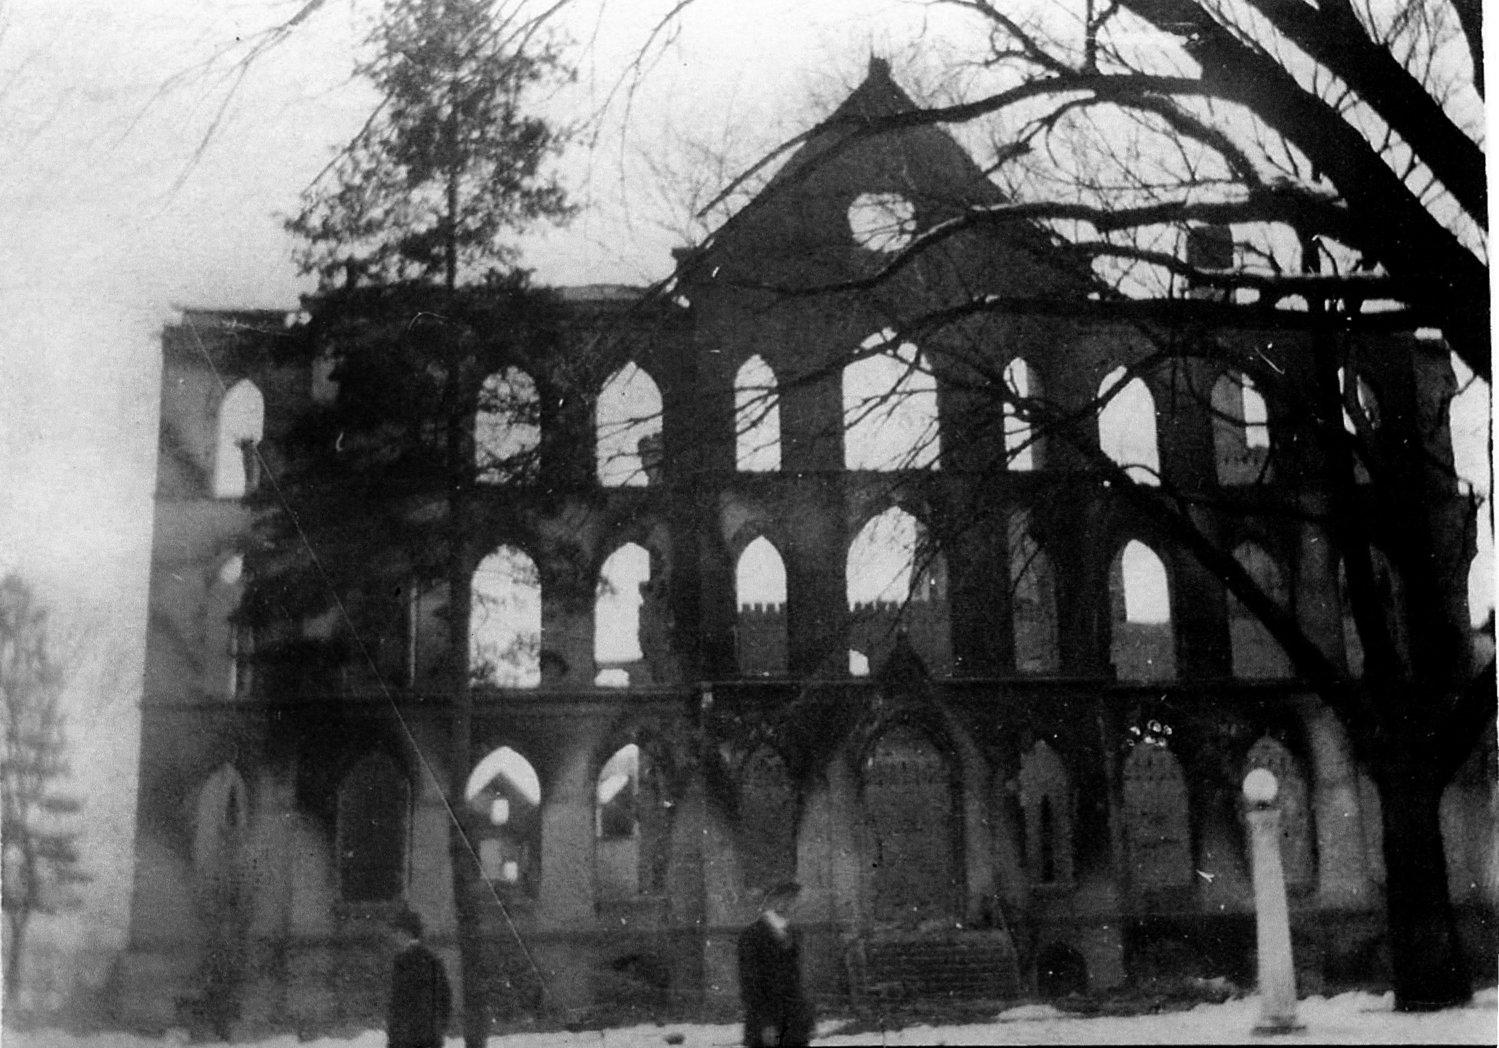 A massive fire March 6, 1915, destroyed Old Main and other educational buildings on the University of Central Missouri campus, then known as the State Normal School, Second District.